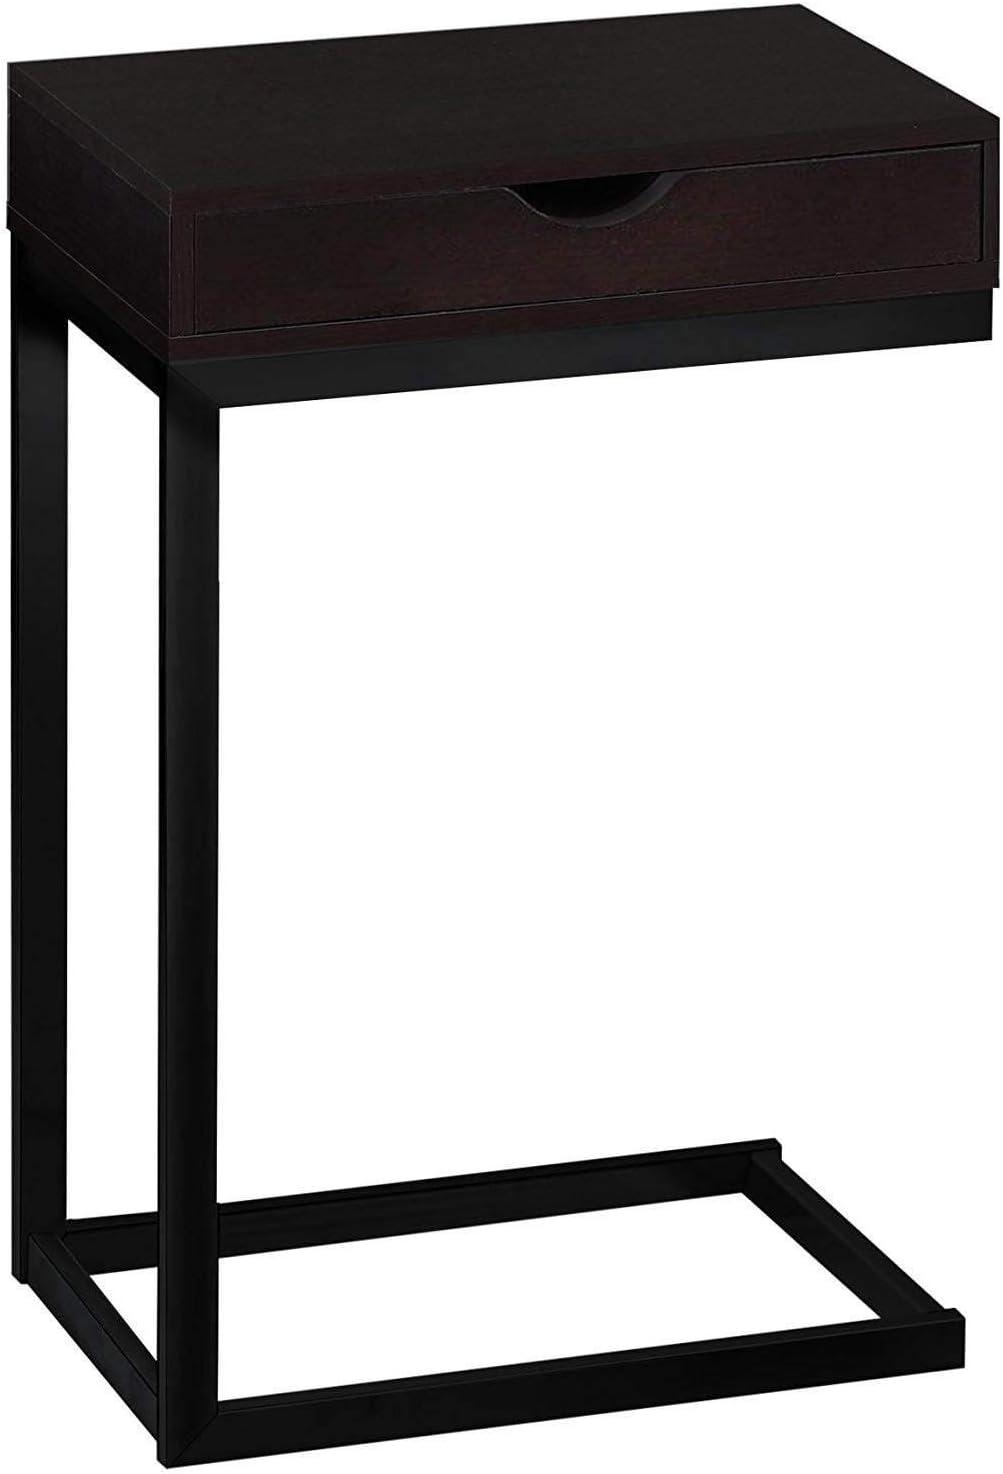 Cappuccino Rectangular C-Table with Storage Drawer and Metal Base